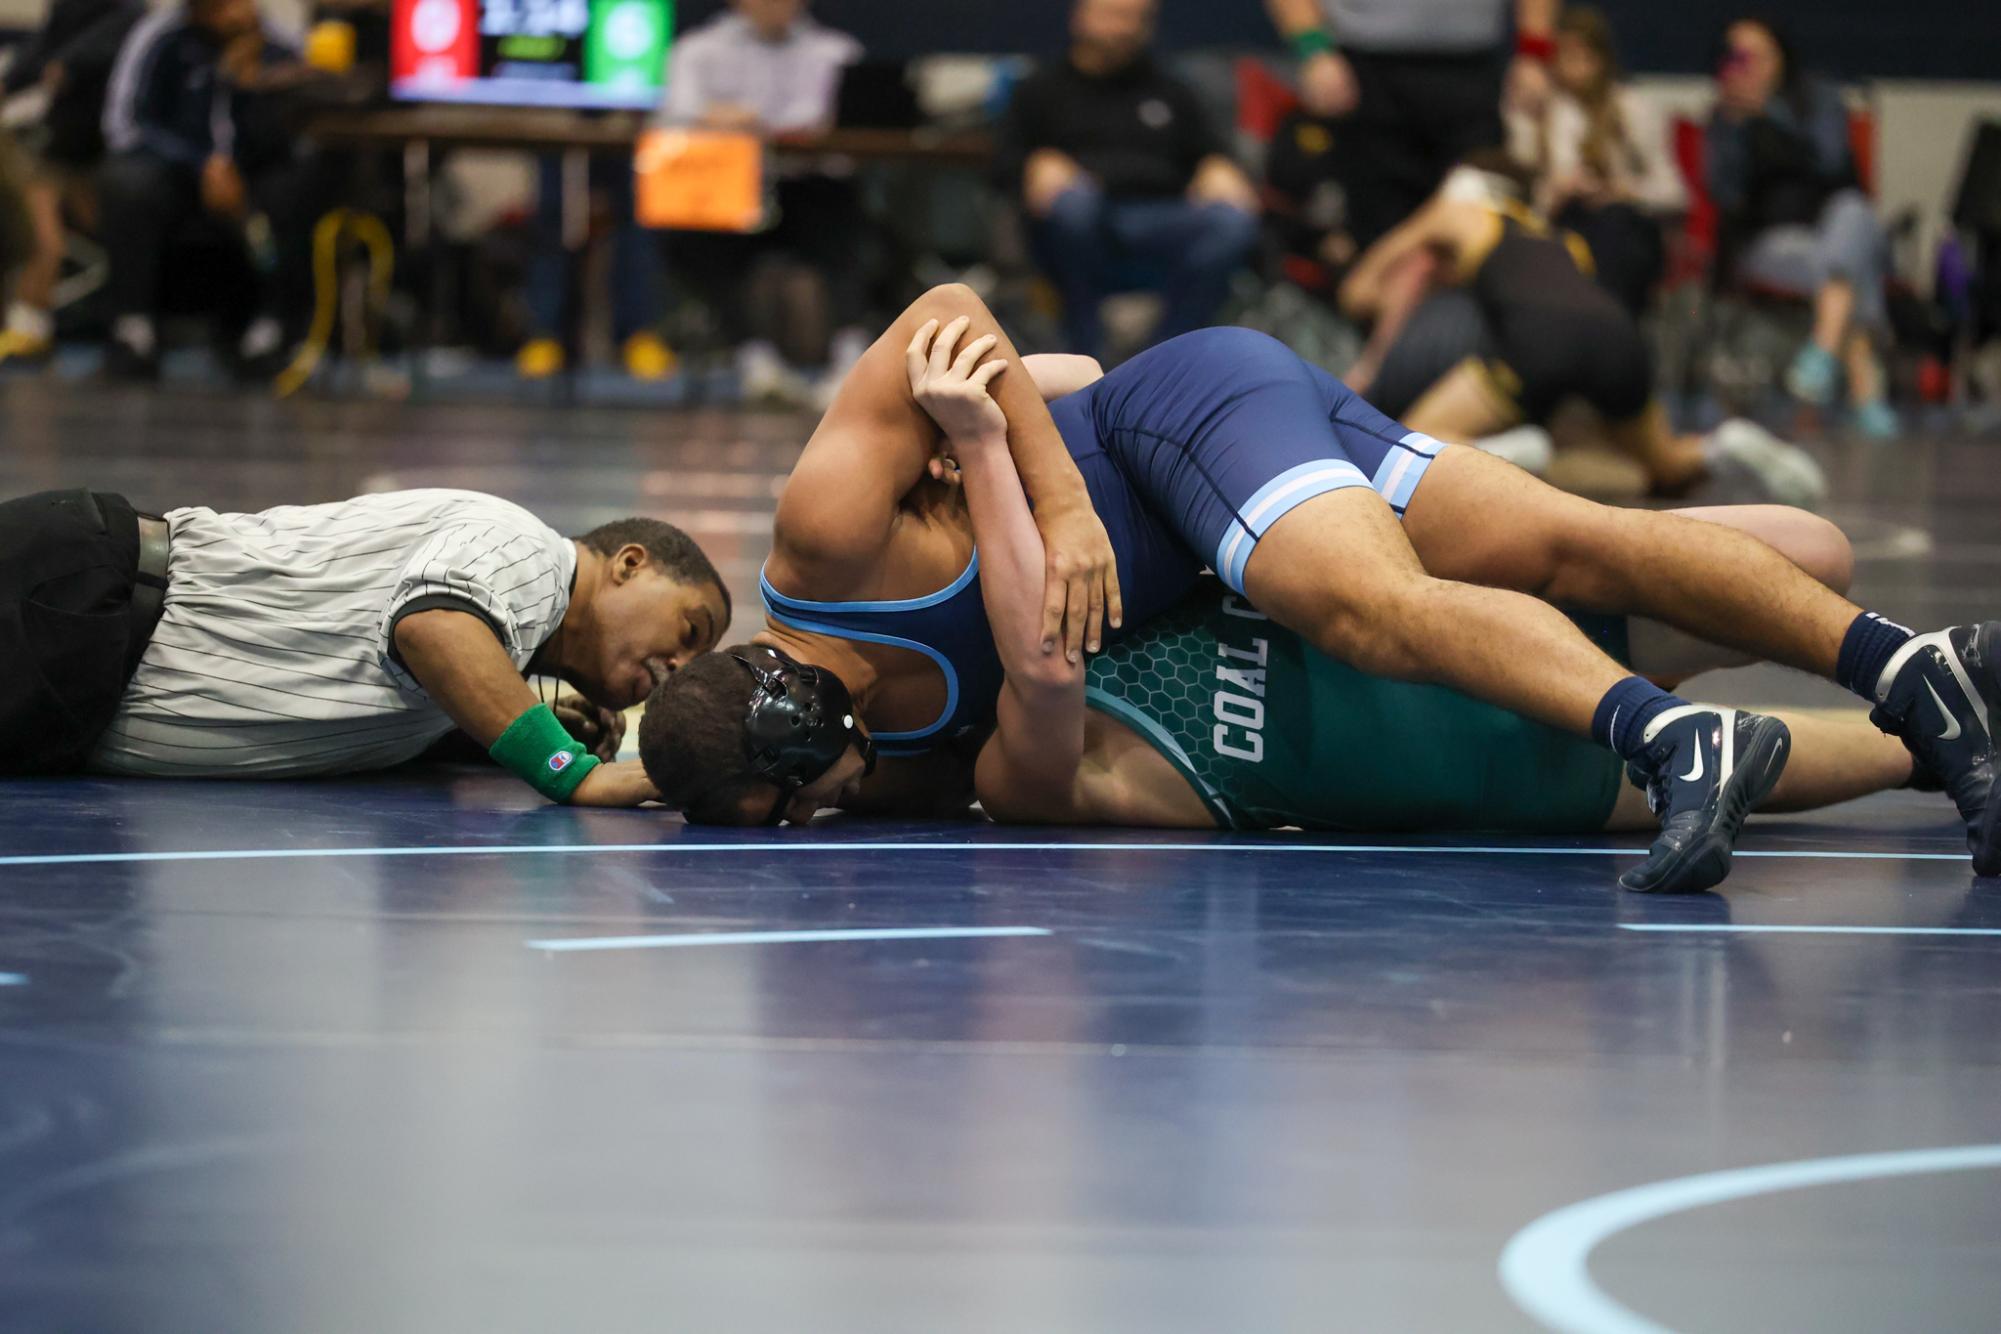 DGS Wrestling Tournament: Strong Comeback and Close Duels